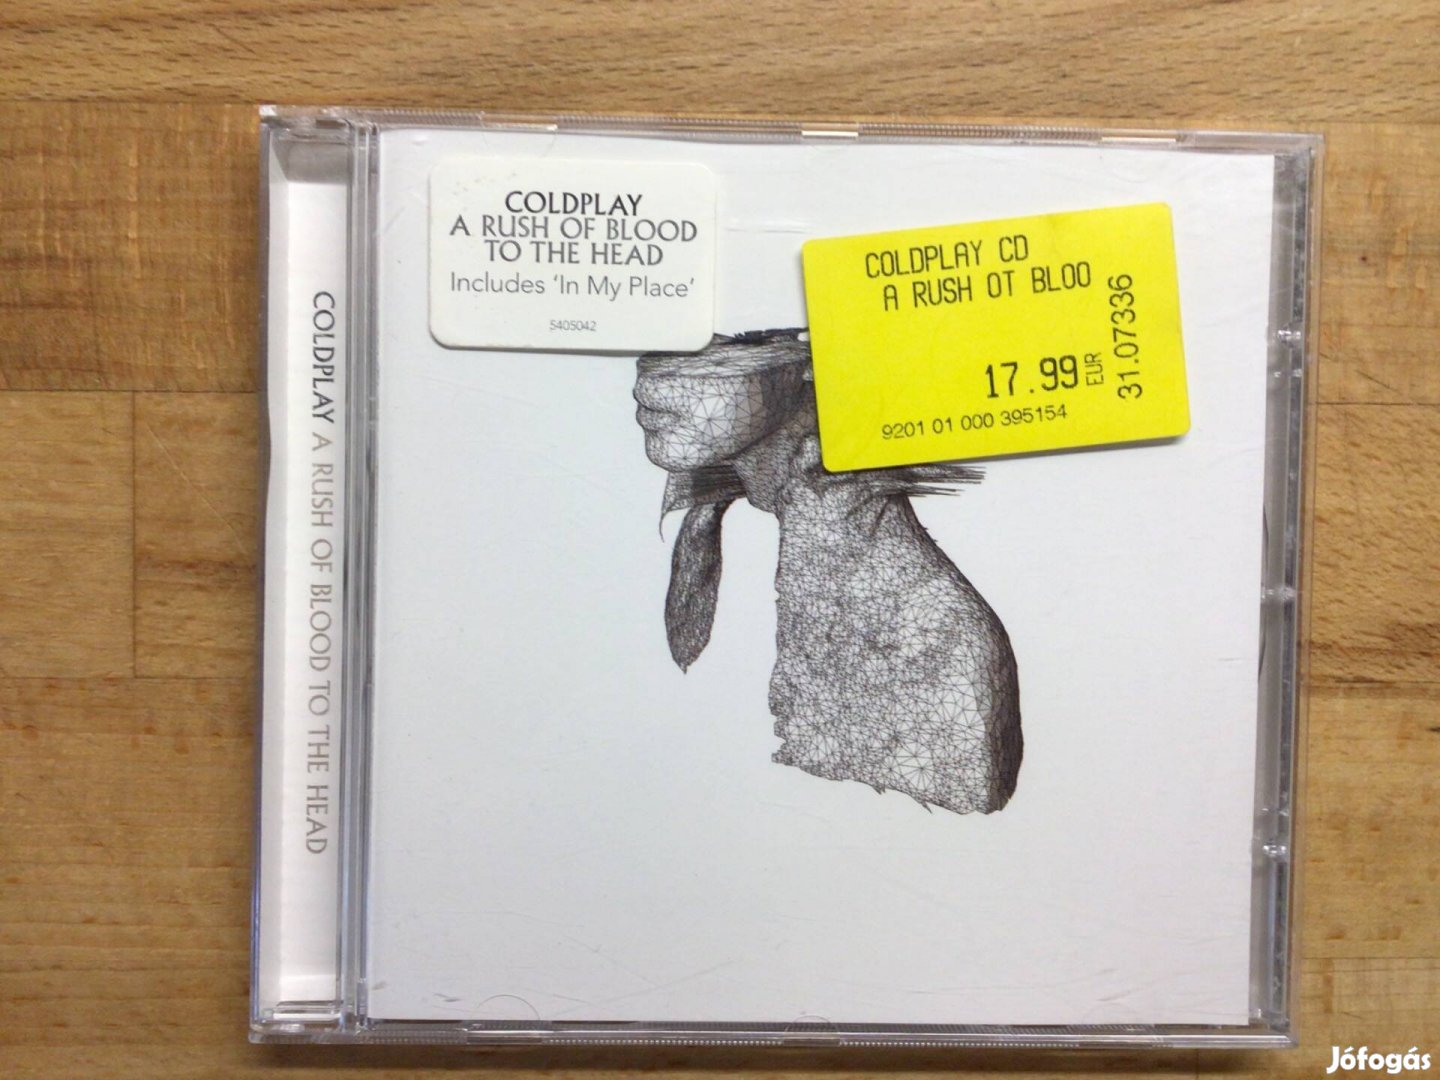 Coldplay- A Rush Of Blood To The Head, cd lemez